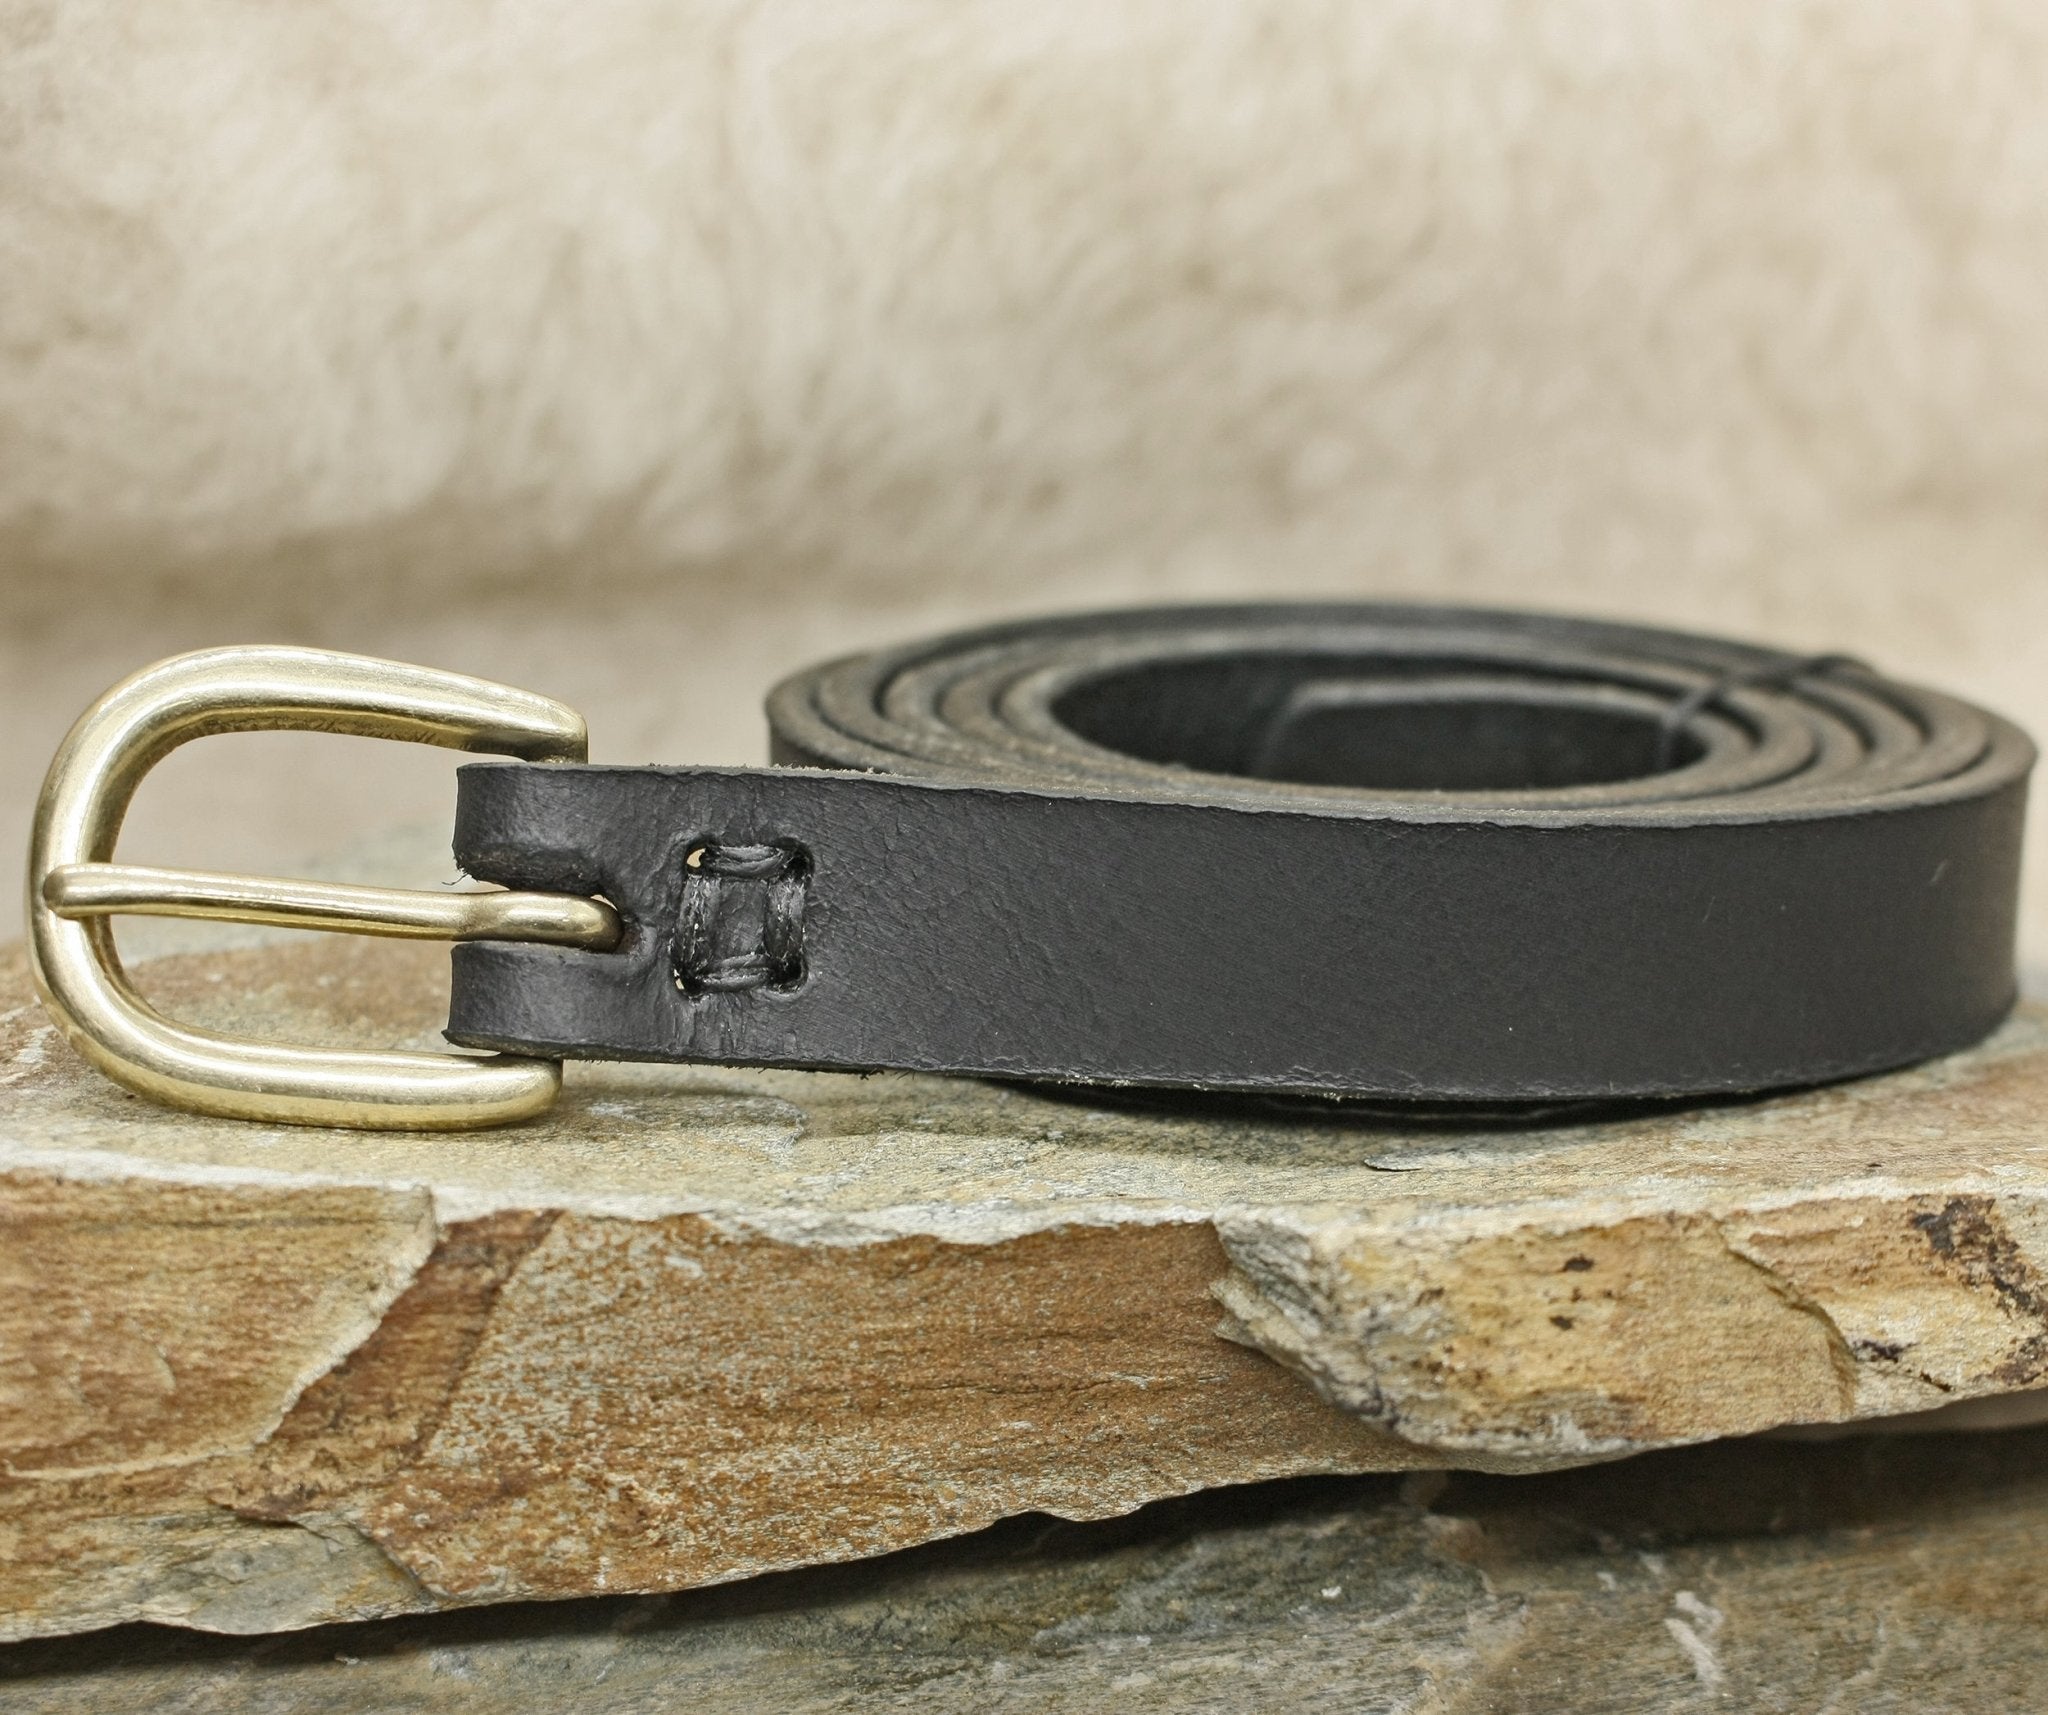 Black 19mm Wide Leather Viking Belt with Brass Buckle